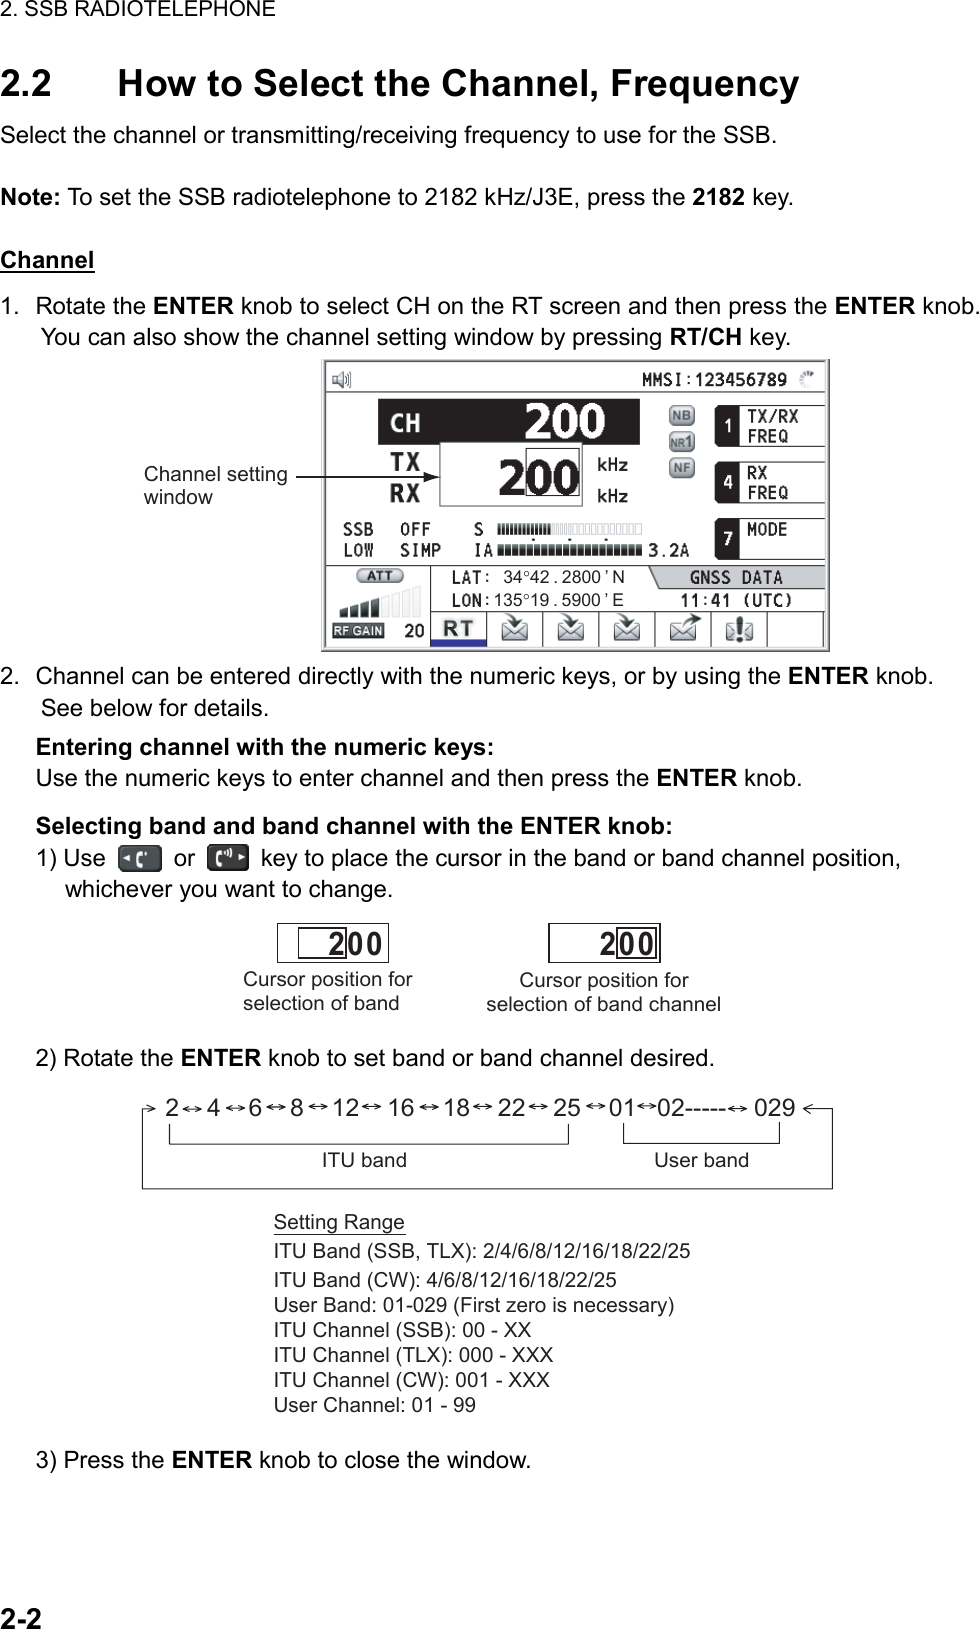 2. SSB RADIOTELEPHONE  2-2  2.2  How to Select the Channel, Frequency Select the channel or transmitting/receiving frequency to use for the SSB.  Note: To set the SSB radiotelephone to 2182 kHz/J3E, press the 2182 key.  Channel 1. Rotate the ENTER knob to select CH on the RT screen and then press the ENTER knob. You can also show the channel setting window by pressing RT/CH key. Channel setting window135°19 . 5900 ’ E34°42 . 2800 ’ N 2.  Channel can be entered directly with the numeric keys, or by using the ENTER knob. See below for details. Entering channel with the numeric keys: Use the numeric keys to enter channel and then press the ENTER knob. Selecting band and band channel with the ENTER knob: 1) Use   or    key to place the cursor in the band or band channel position, whichever you want to change. Cursor position for selection of band channel         2 0 0Cursor position for selection of band         2 0 0 2) Rotate the ENTER knob to set band or band channel desired. 2    4    6    8    12    16    18    22    25    01   02-----    029ITU band User band Setting RangeITU Band (SSB, TLX): 2/4/6/8/12/16/18/22/25ITU Band (CW): 4/6/8/12/16/18/22/25User Band: 01-029 (First zero is necessary)ITU Channel (SSB): 00 - XXITU Channel (TLX): 000 - XXXITU Channel (CW): 001 - XXXUser Channel: 01 - 99 3) Press the ENTER knob to close the window.  